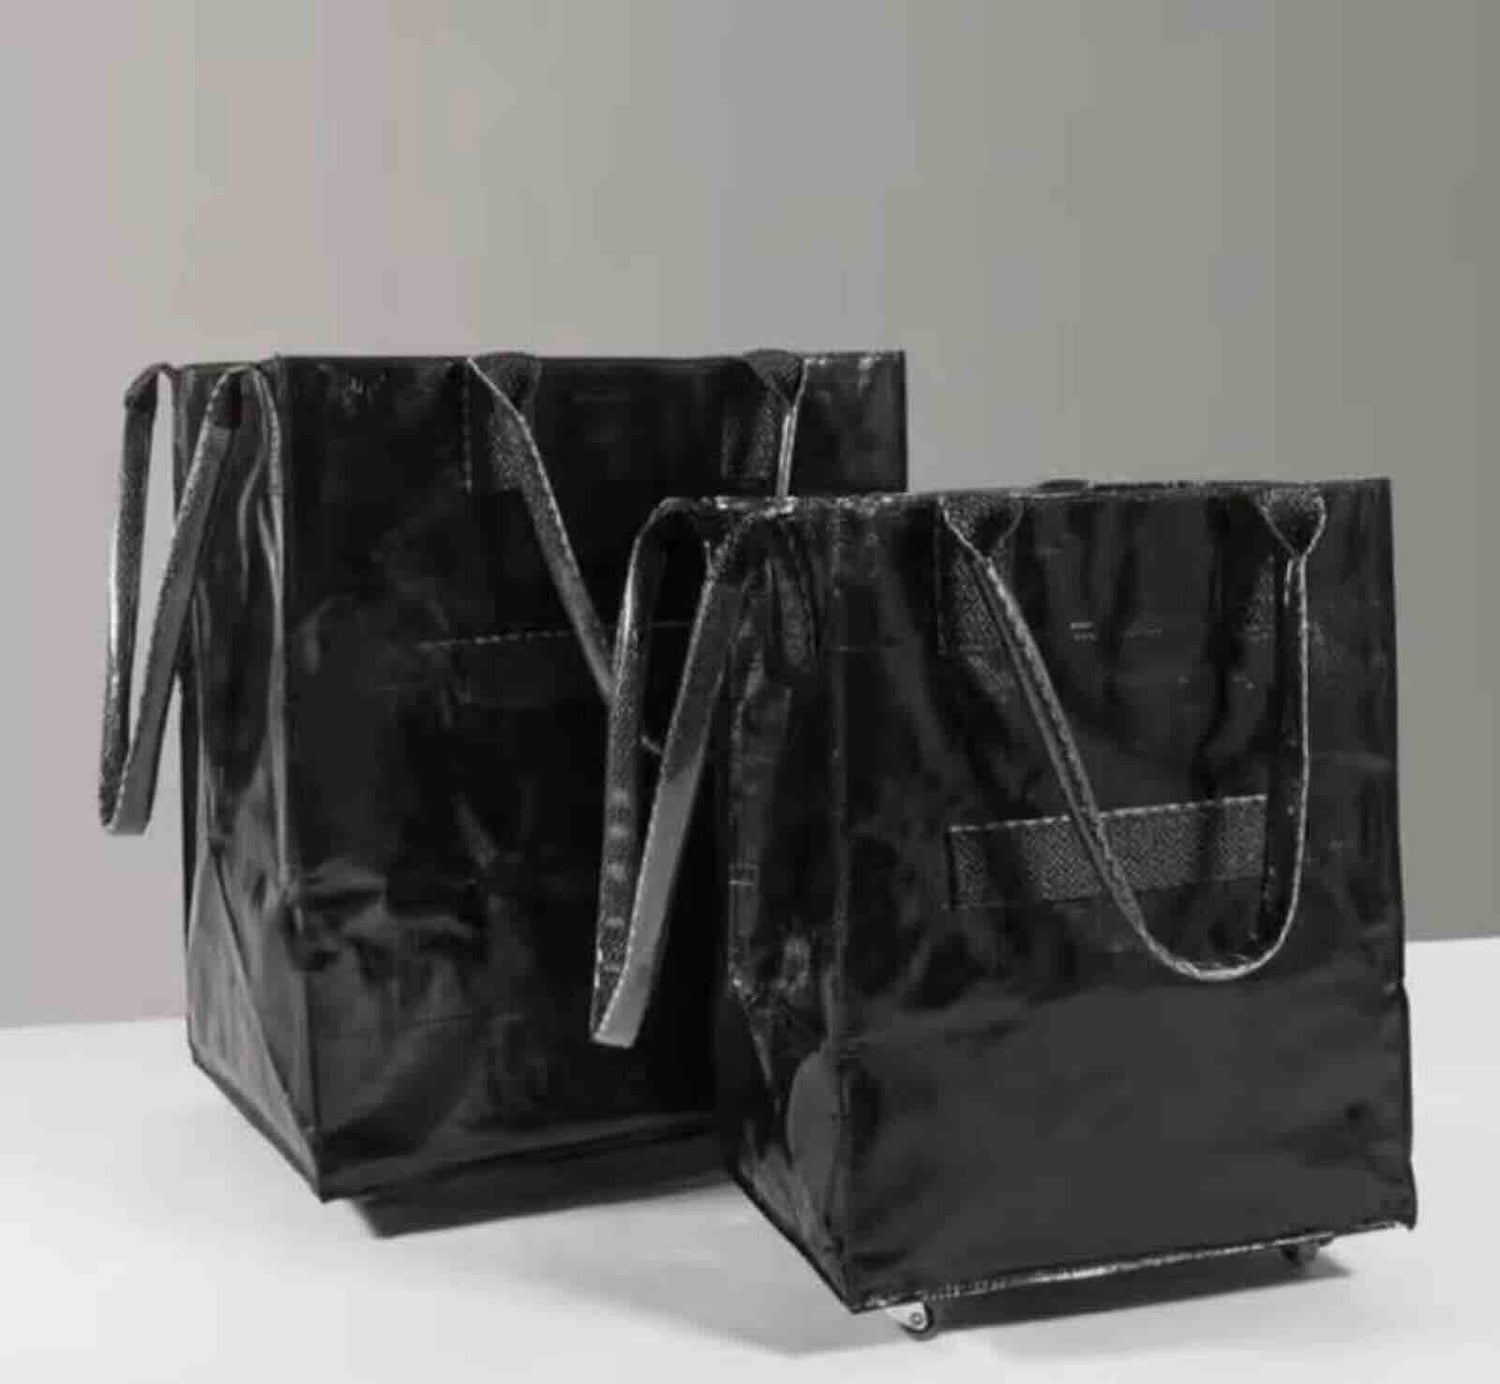 Transformable Hand bags to Shopping Bags